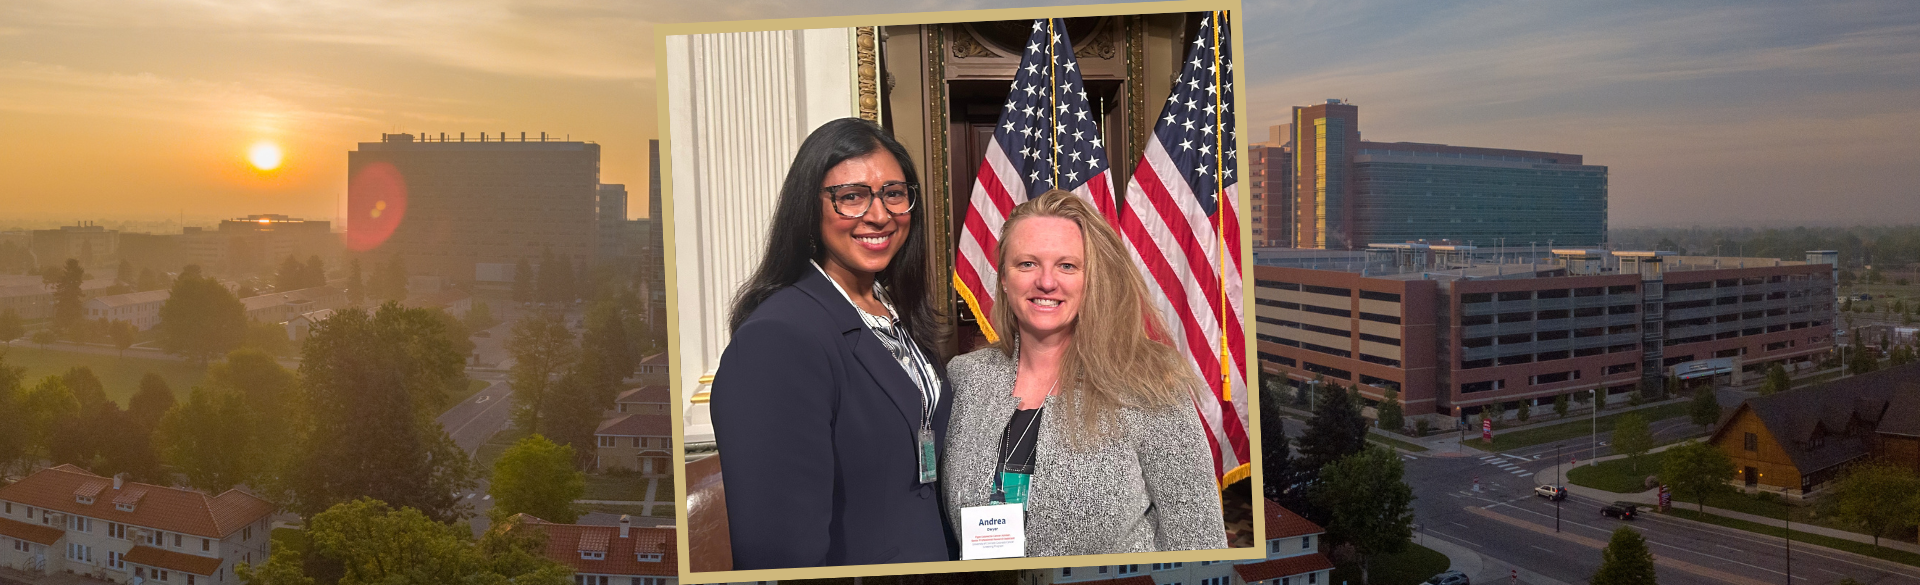 Andrea Dwyer, director of the Colorado Cancer Screening Program, and gastroenterologist Swati Patel, MD, flew to Washington for the March 10 forum.